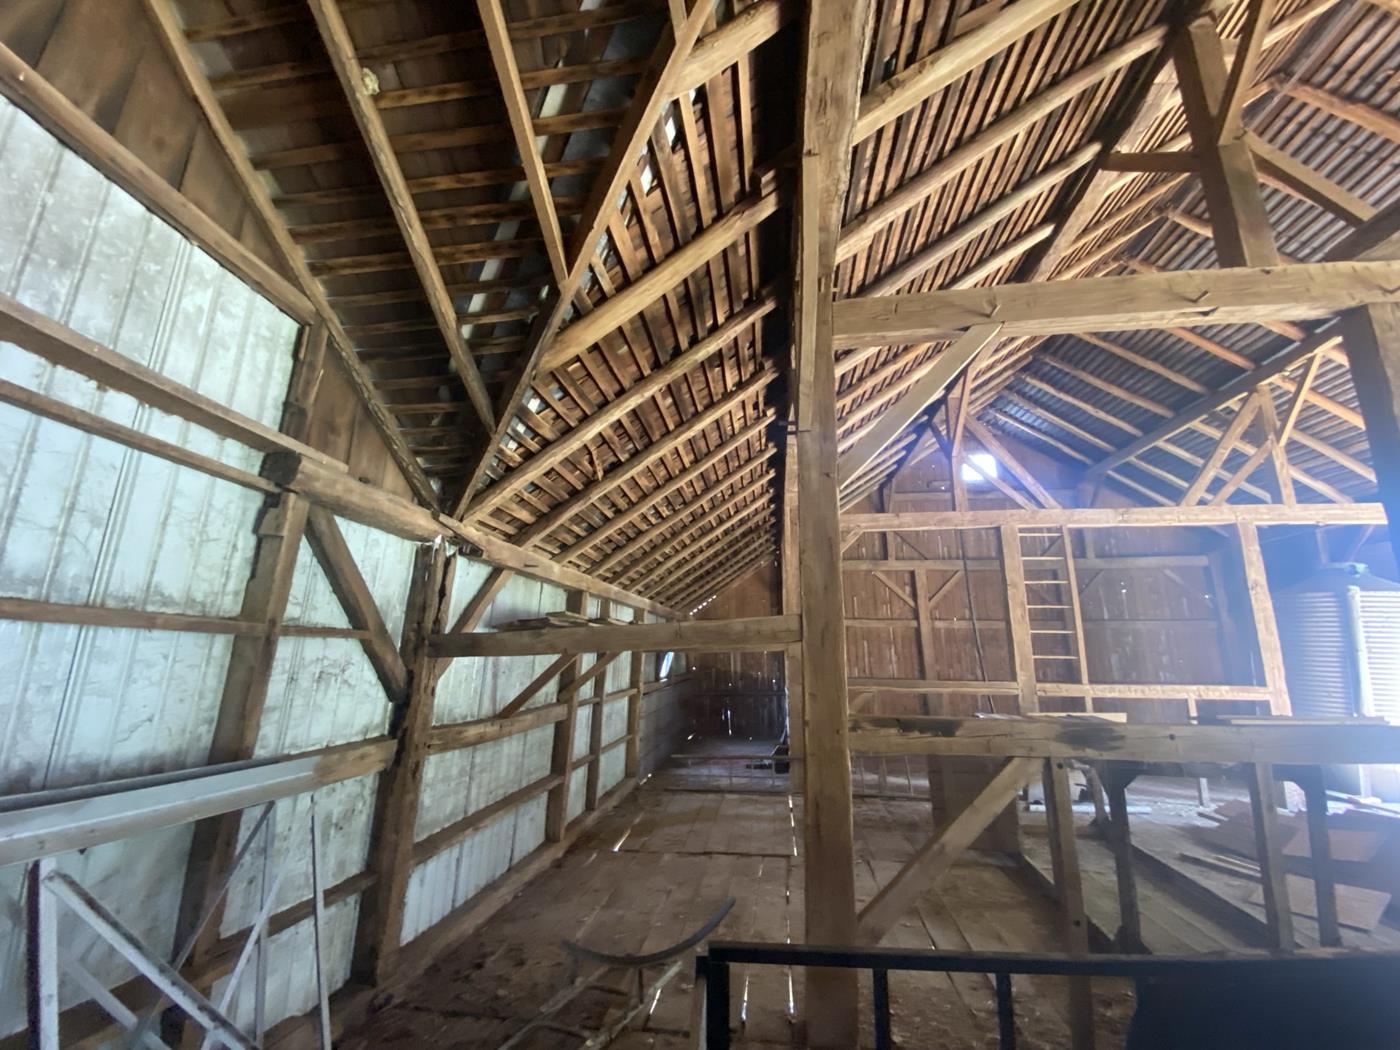 https://www.ohiovalleybarnsalvage.com/images/Historic Zace Barn Fram OVBS - Your Source For Sawn Barn Timbers